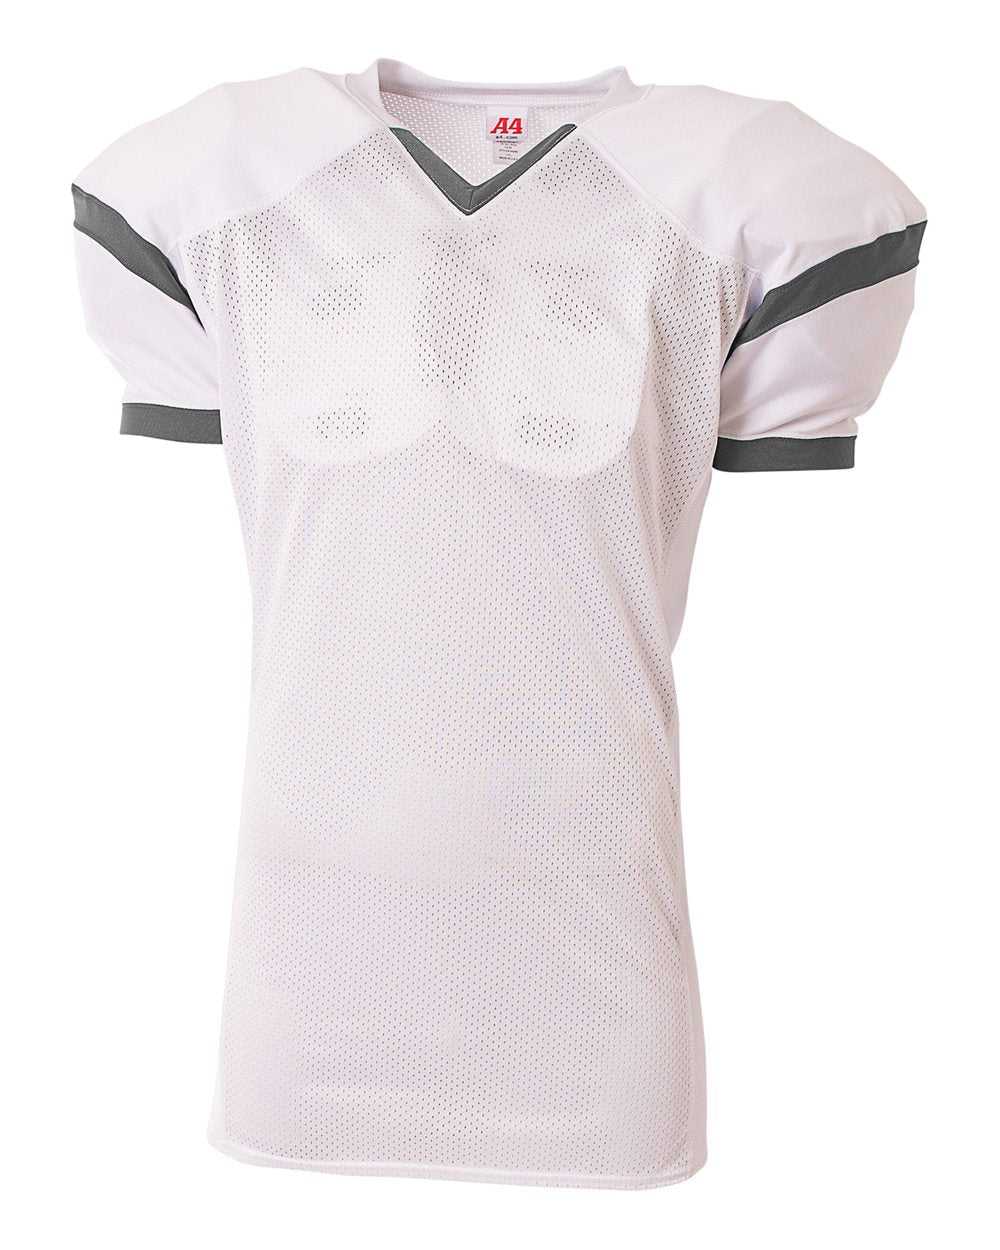 A4 N4265 The Rollout Football Jersey - White Graphite - HIT a Double